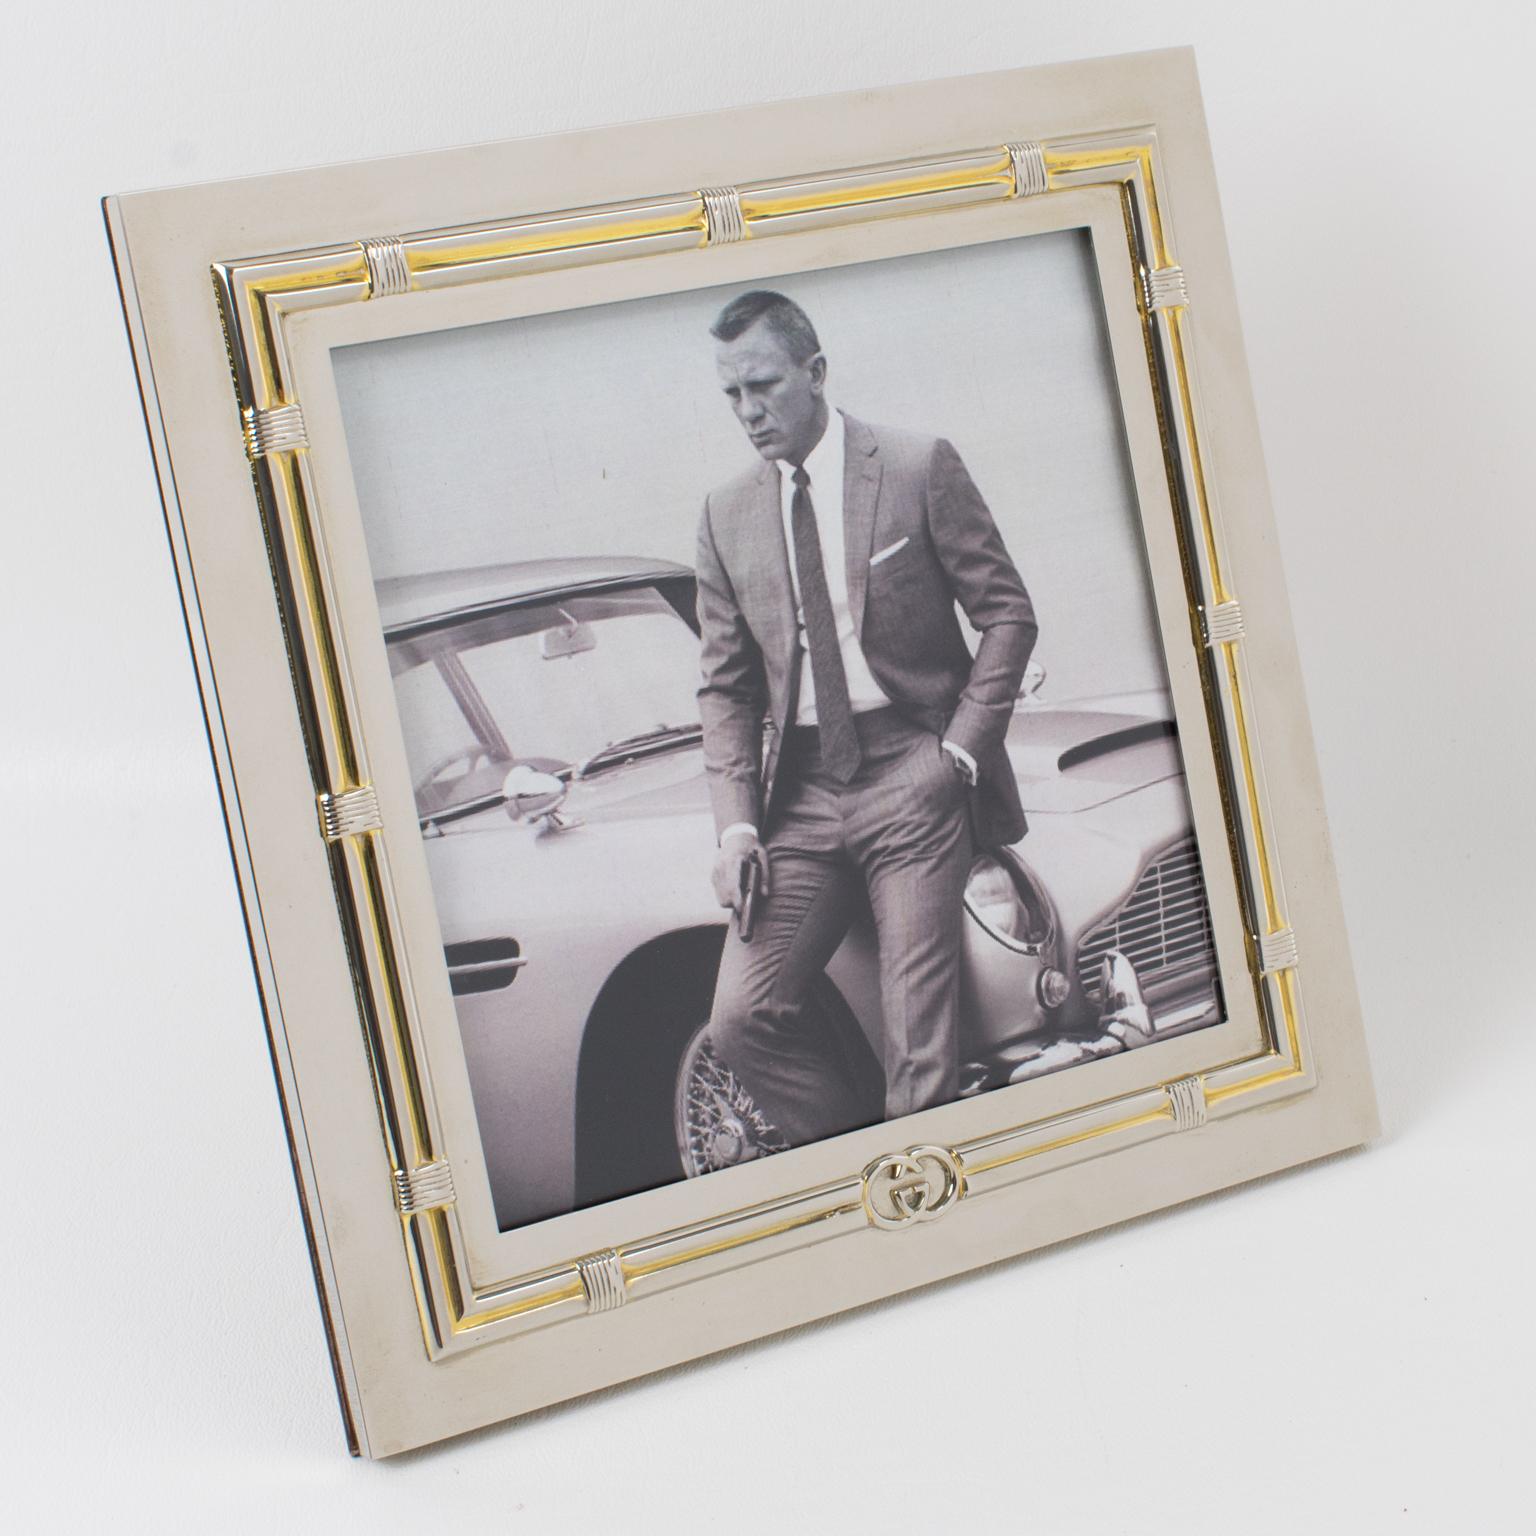 So elegant picture photo frame by Italian designer Gucci. Square shape in silver plate with gold plate accents in the carved design all around. GG logo on the front and also at the back. High gloss wood back and easel. Stamped 